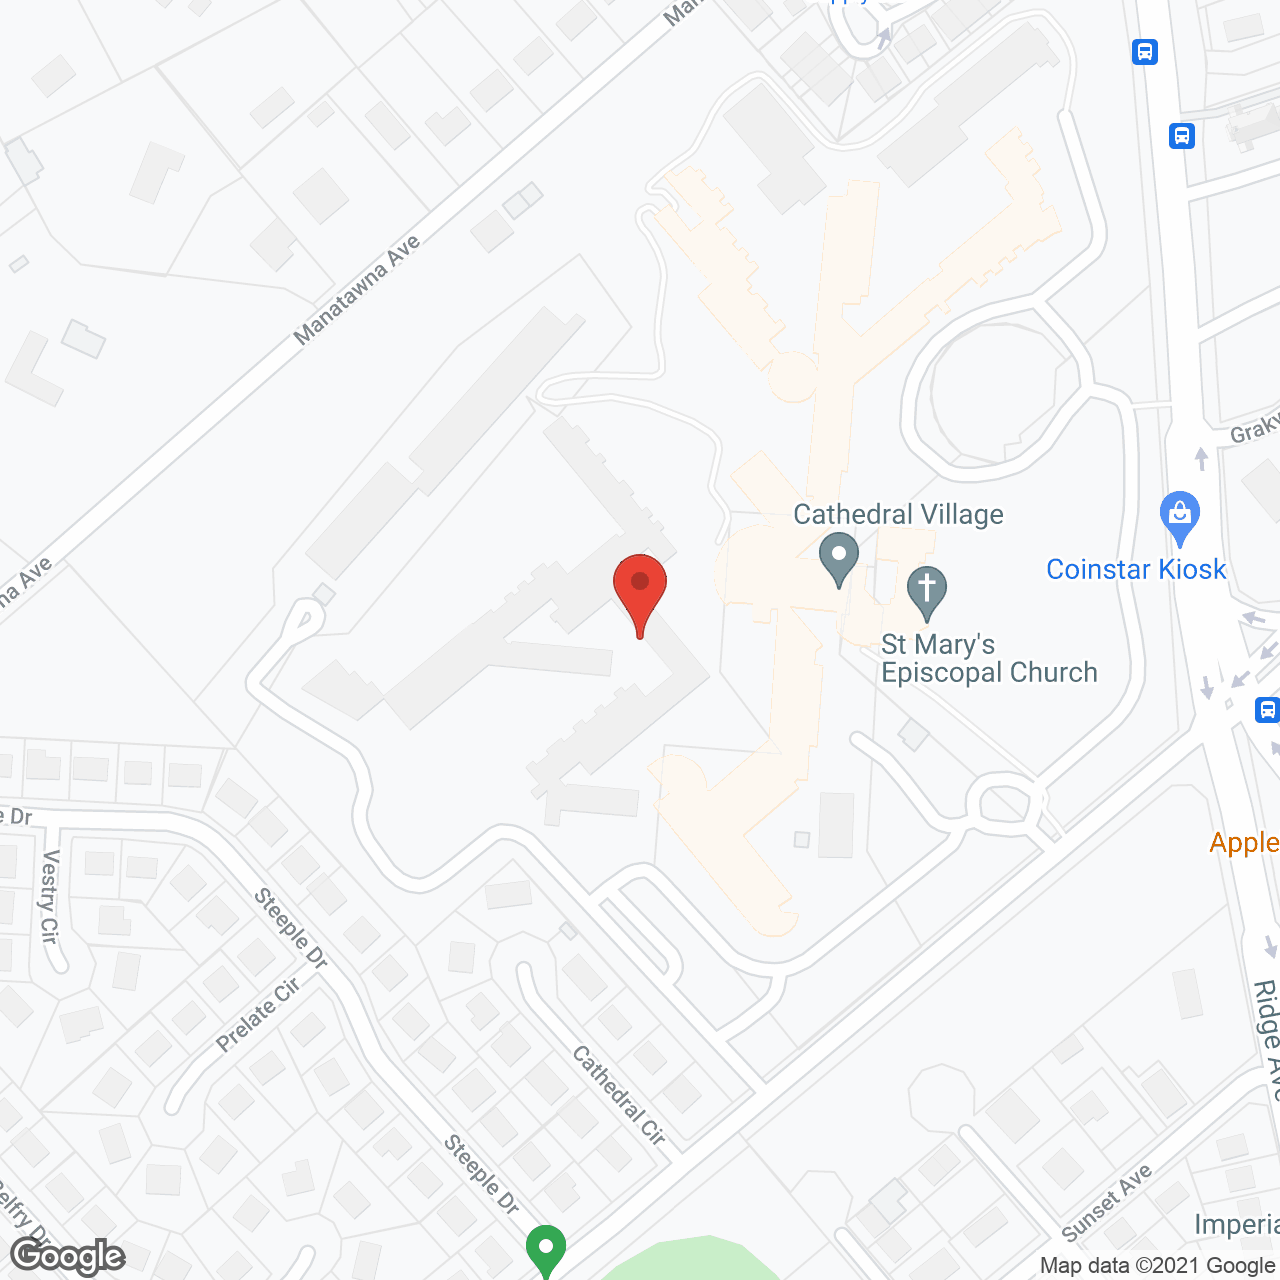 Cathedral Village in google map